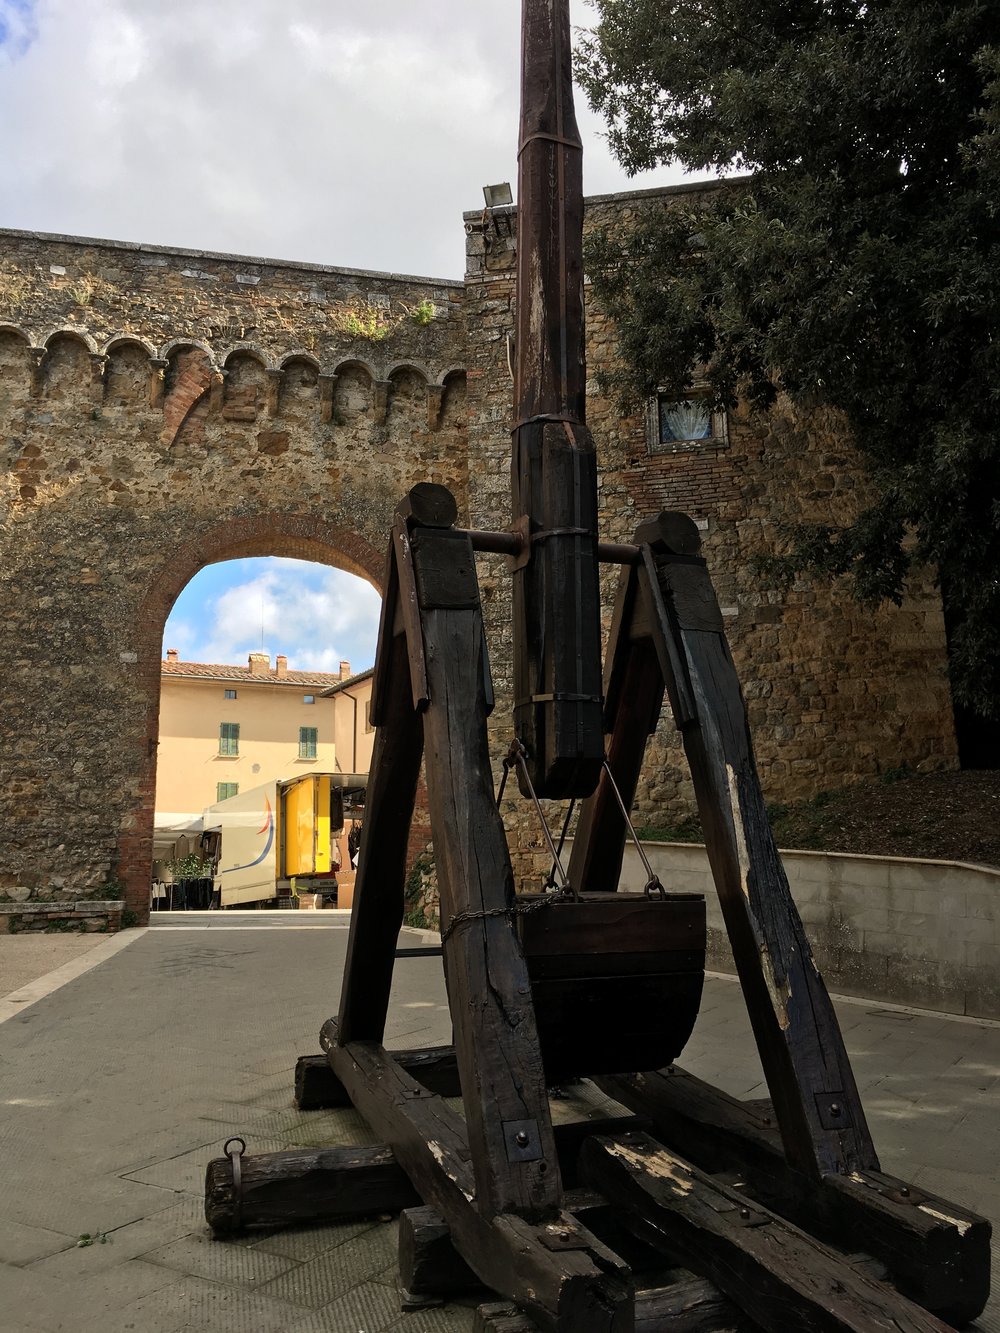 San Quirico d’Orcia - a short distance away- another Middle Ages town